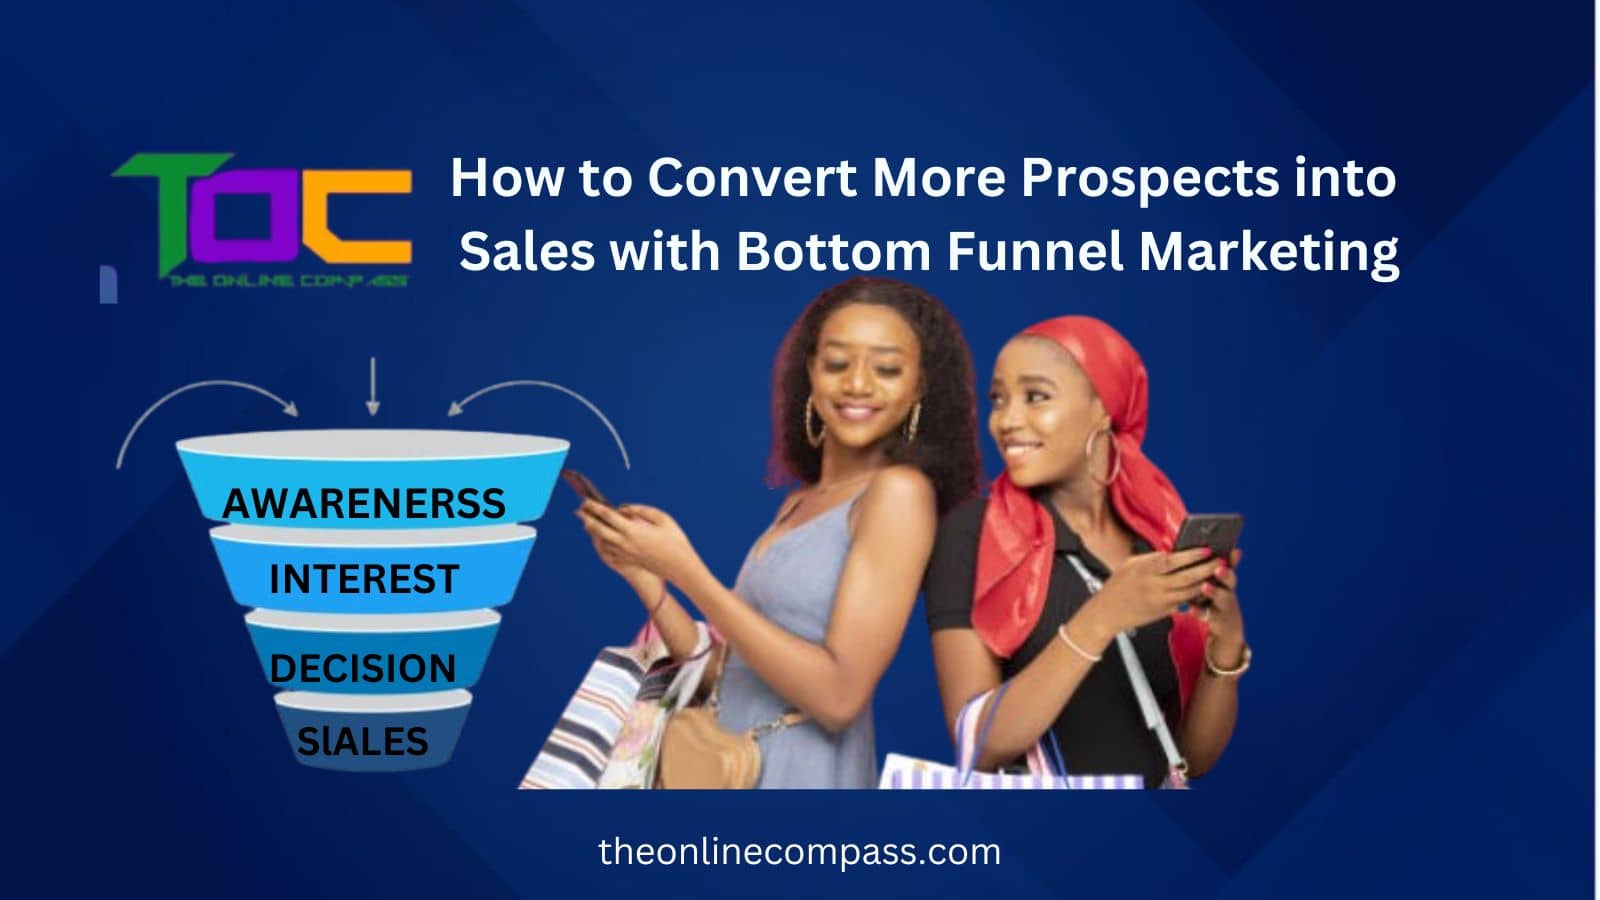 How to Convert More Prospects into Sales with Bottom Funnel Marketing